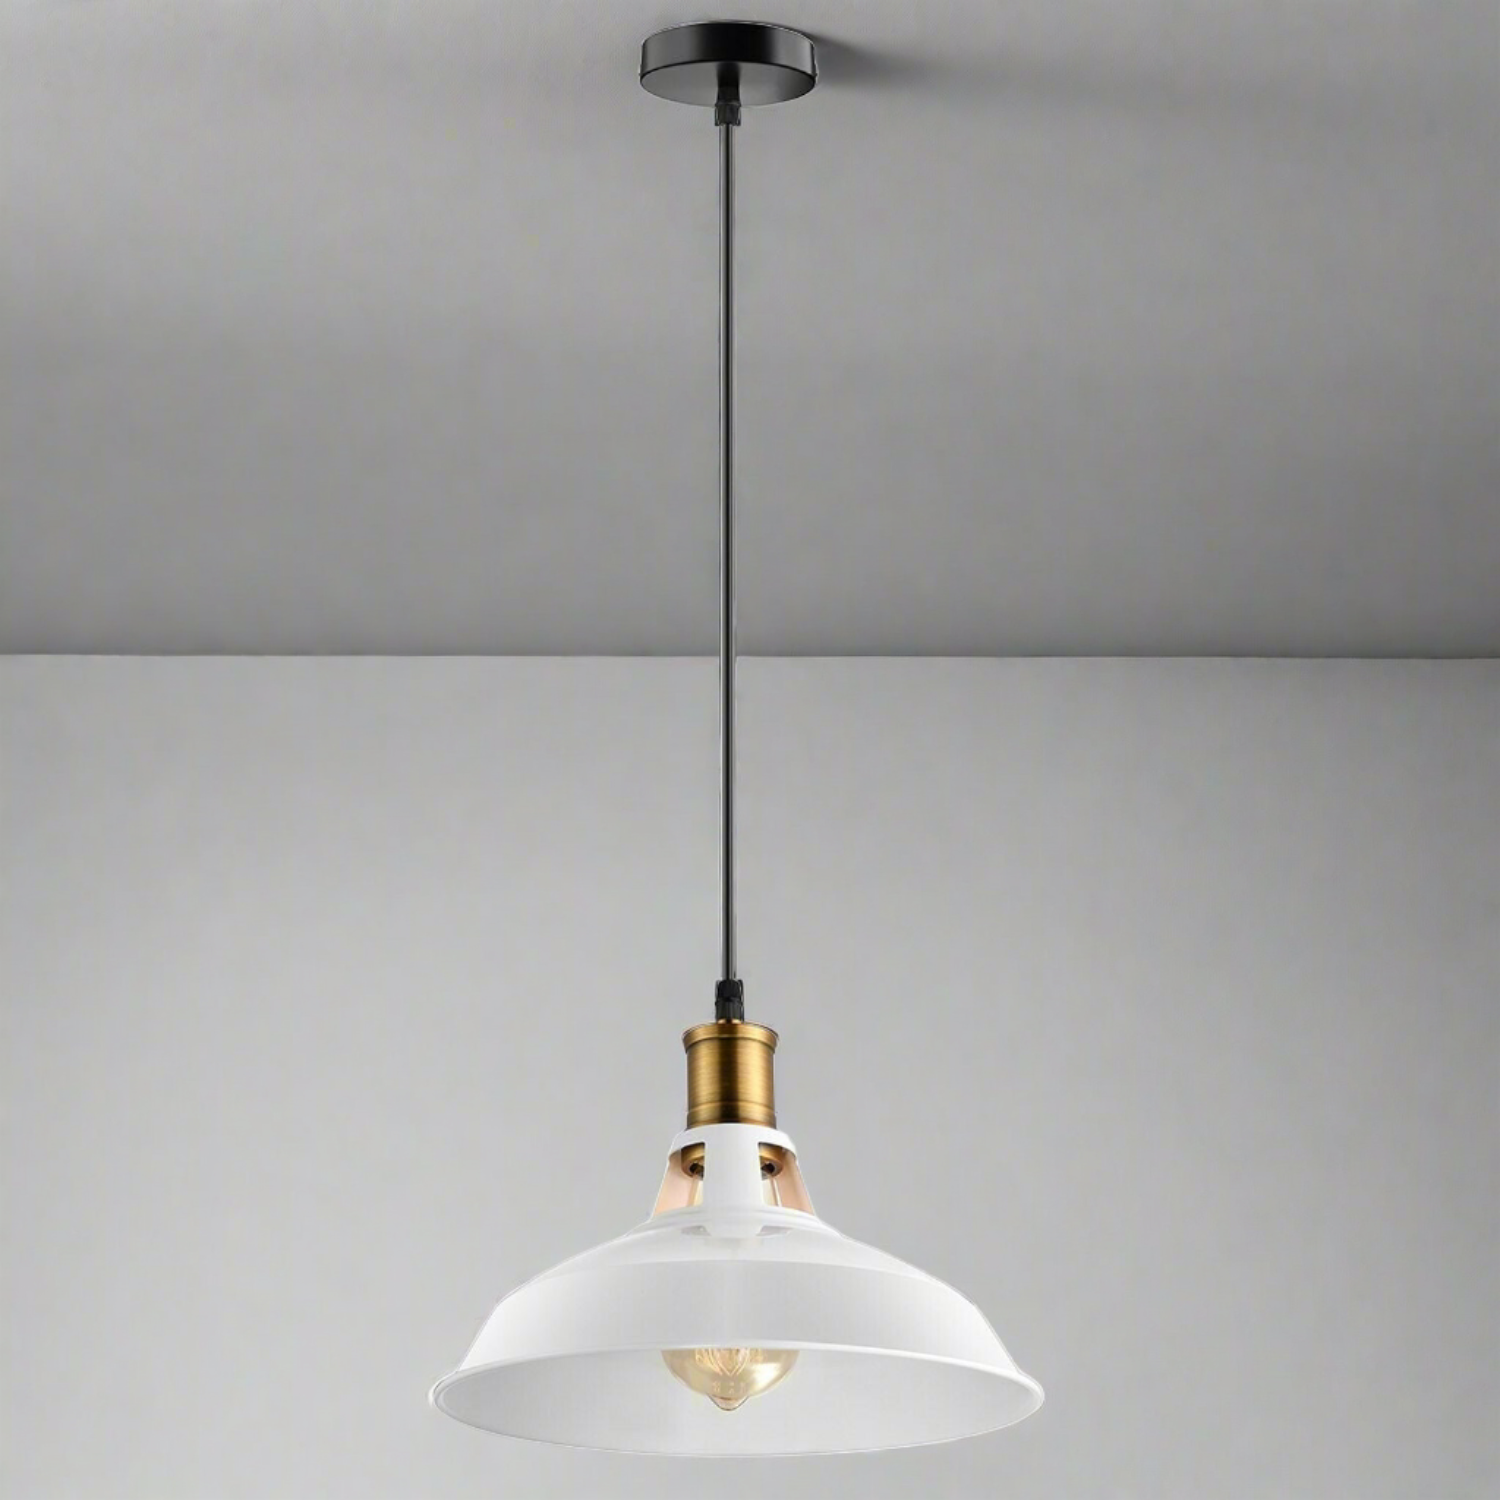 White Pendant light with Gold Accents